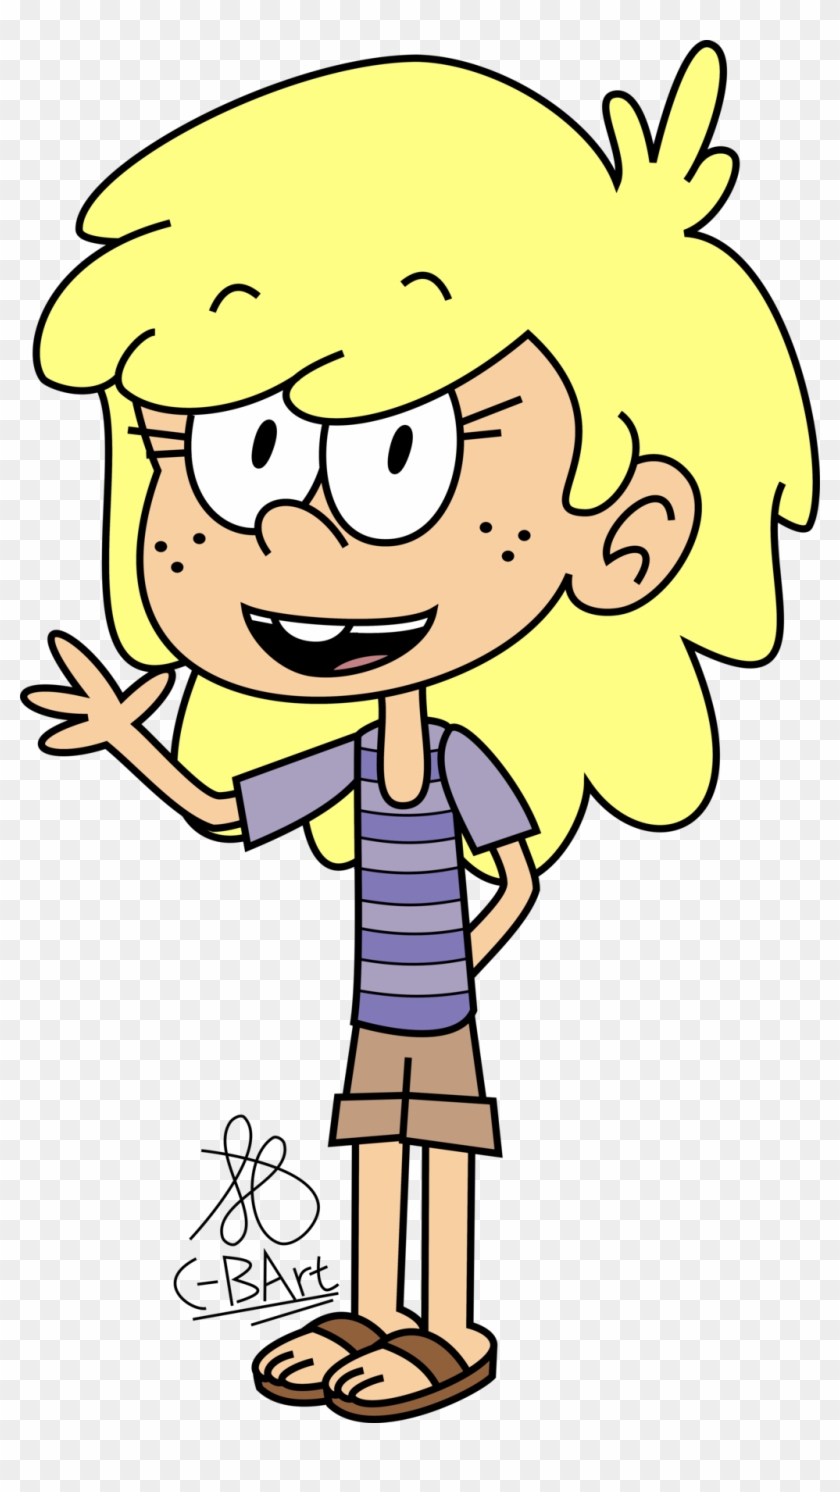 Lily Loud By C-bart - Loud House Lily 11 Years Old #802862